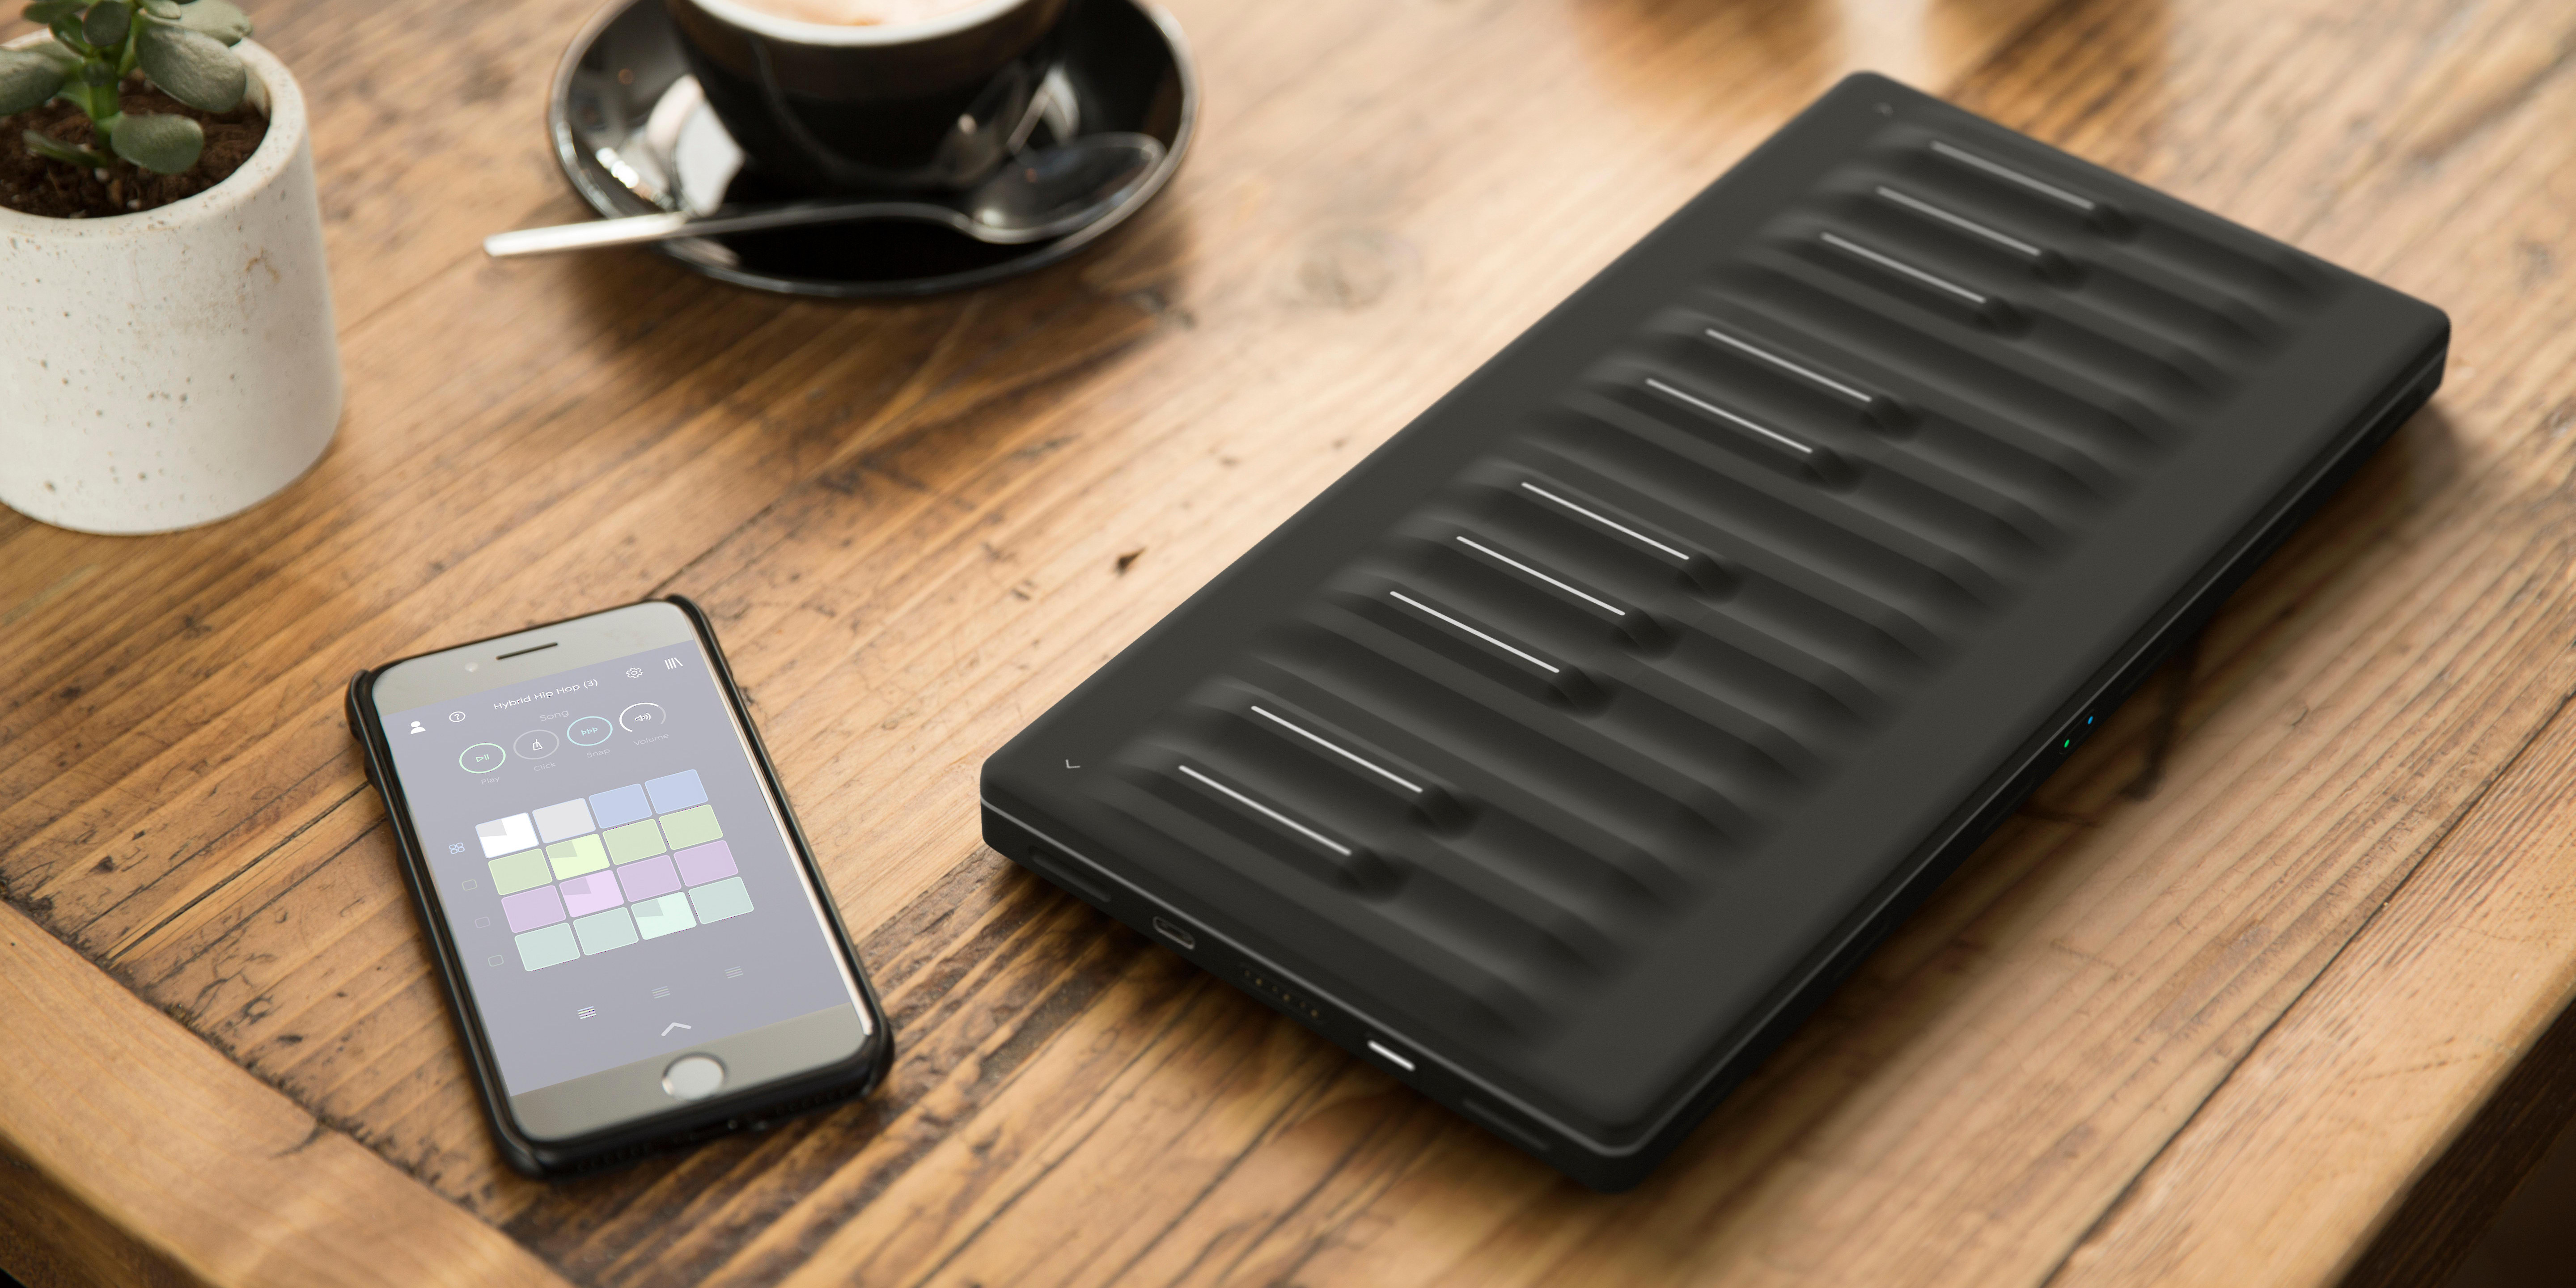 Logic Pros Review: Seaboard Block brings 5D MIDI touch control to an affordable price tag - 9to5Mac